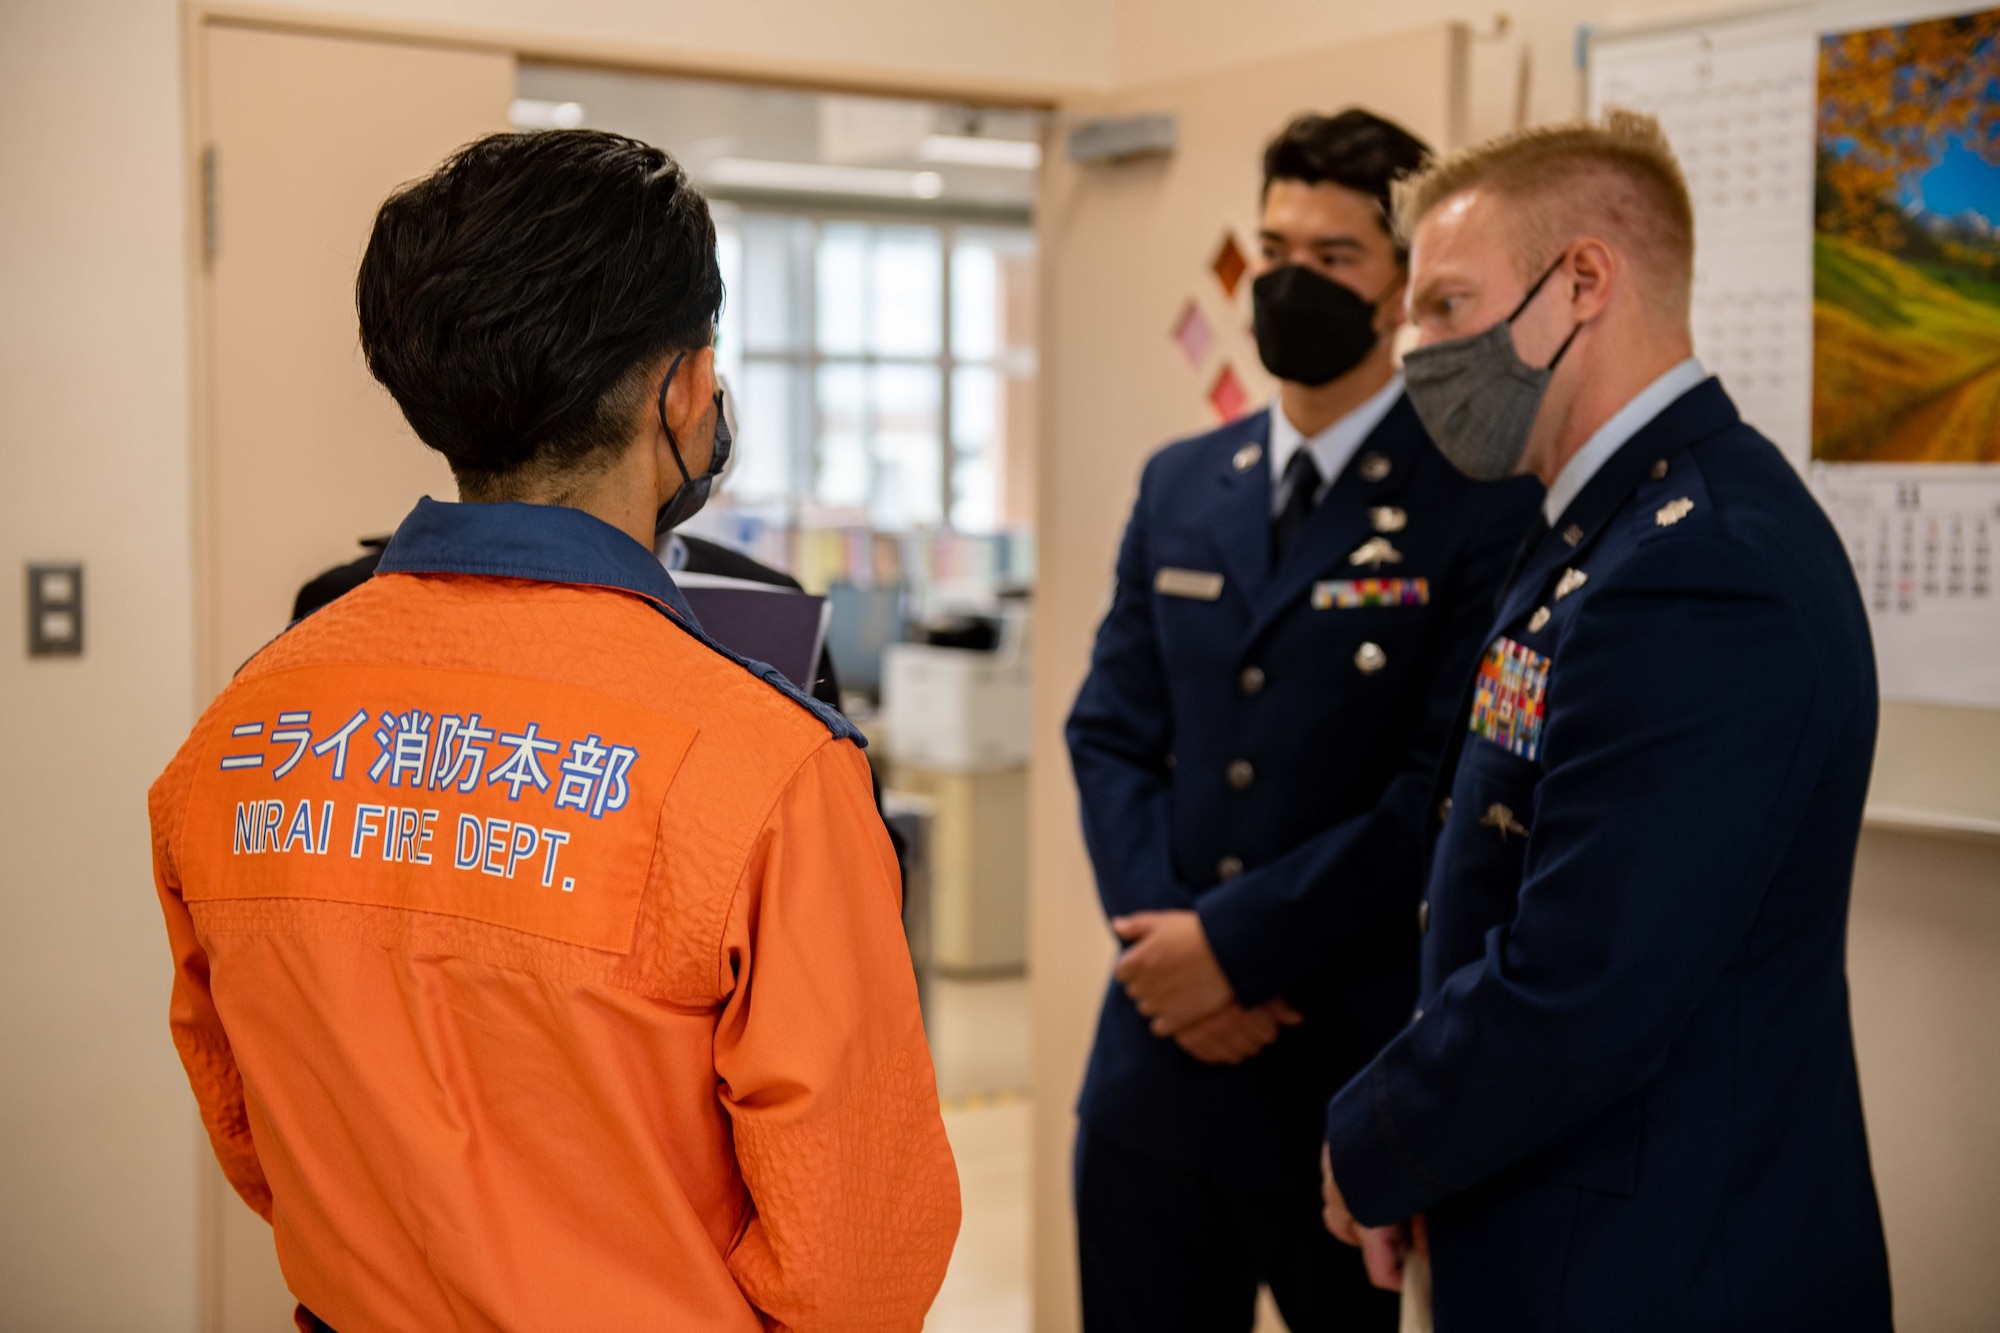 A Japanese fire fighter chats with two airmen